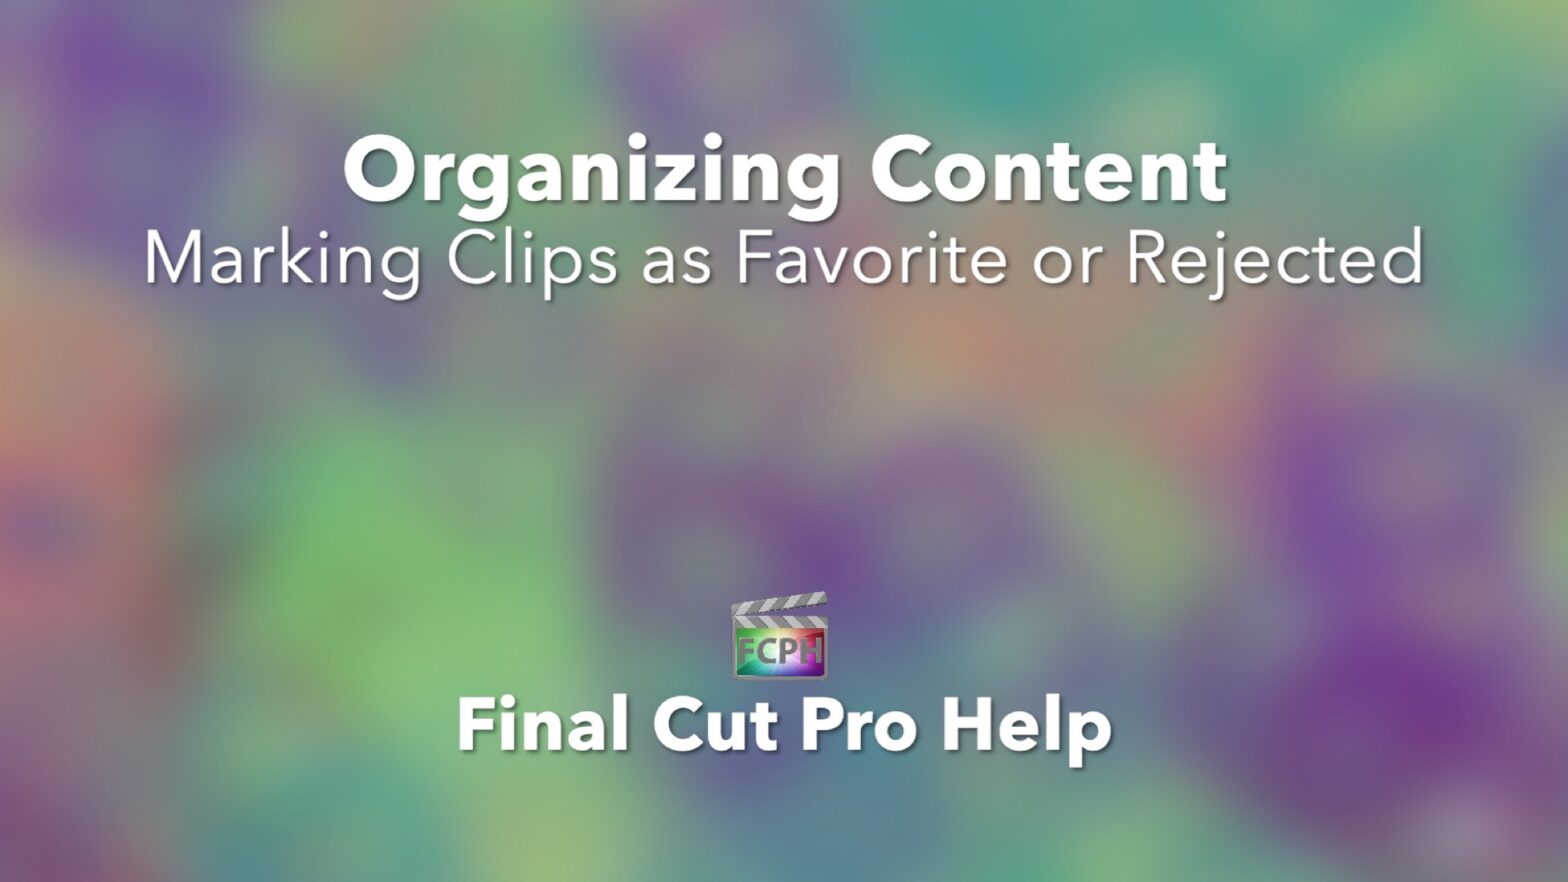 Organizing Content Marking Clips as Favorite or Rejected